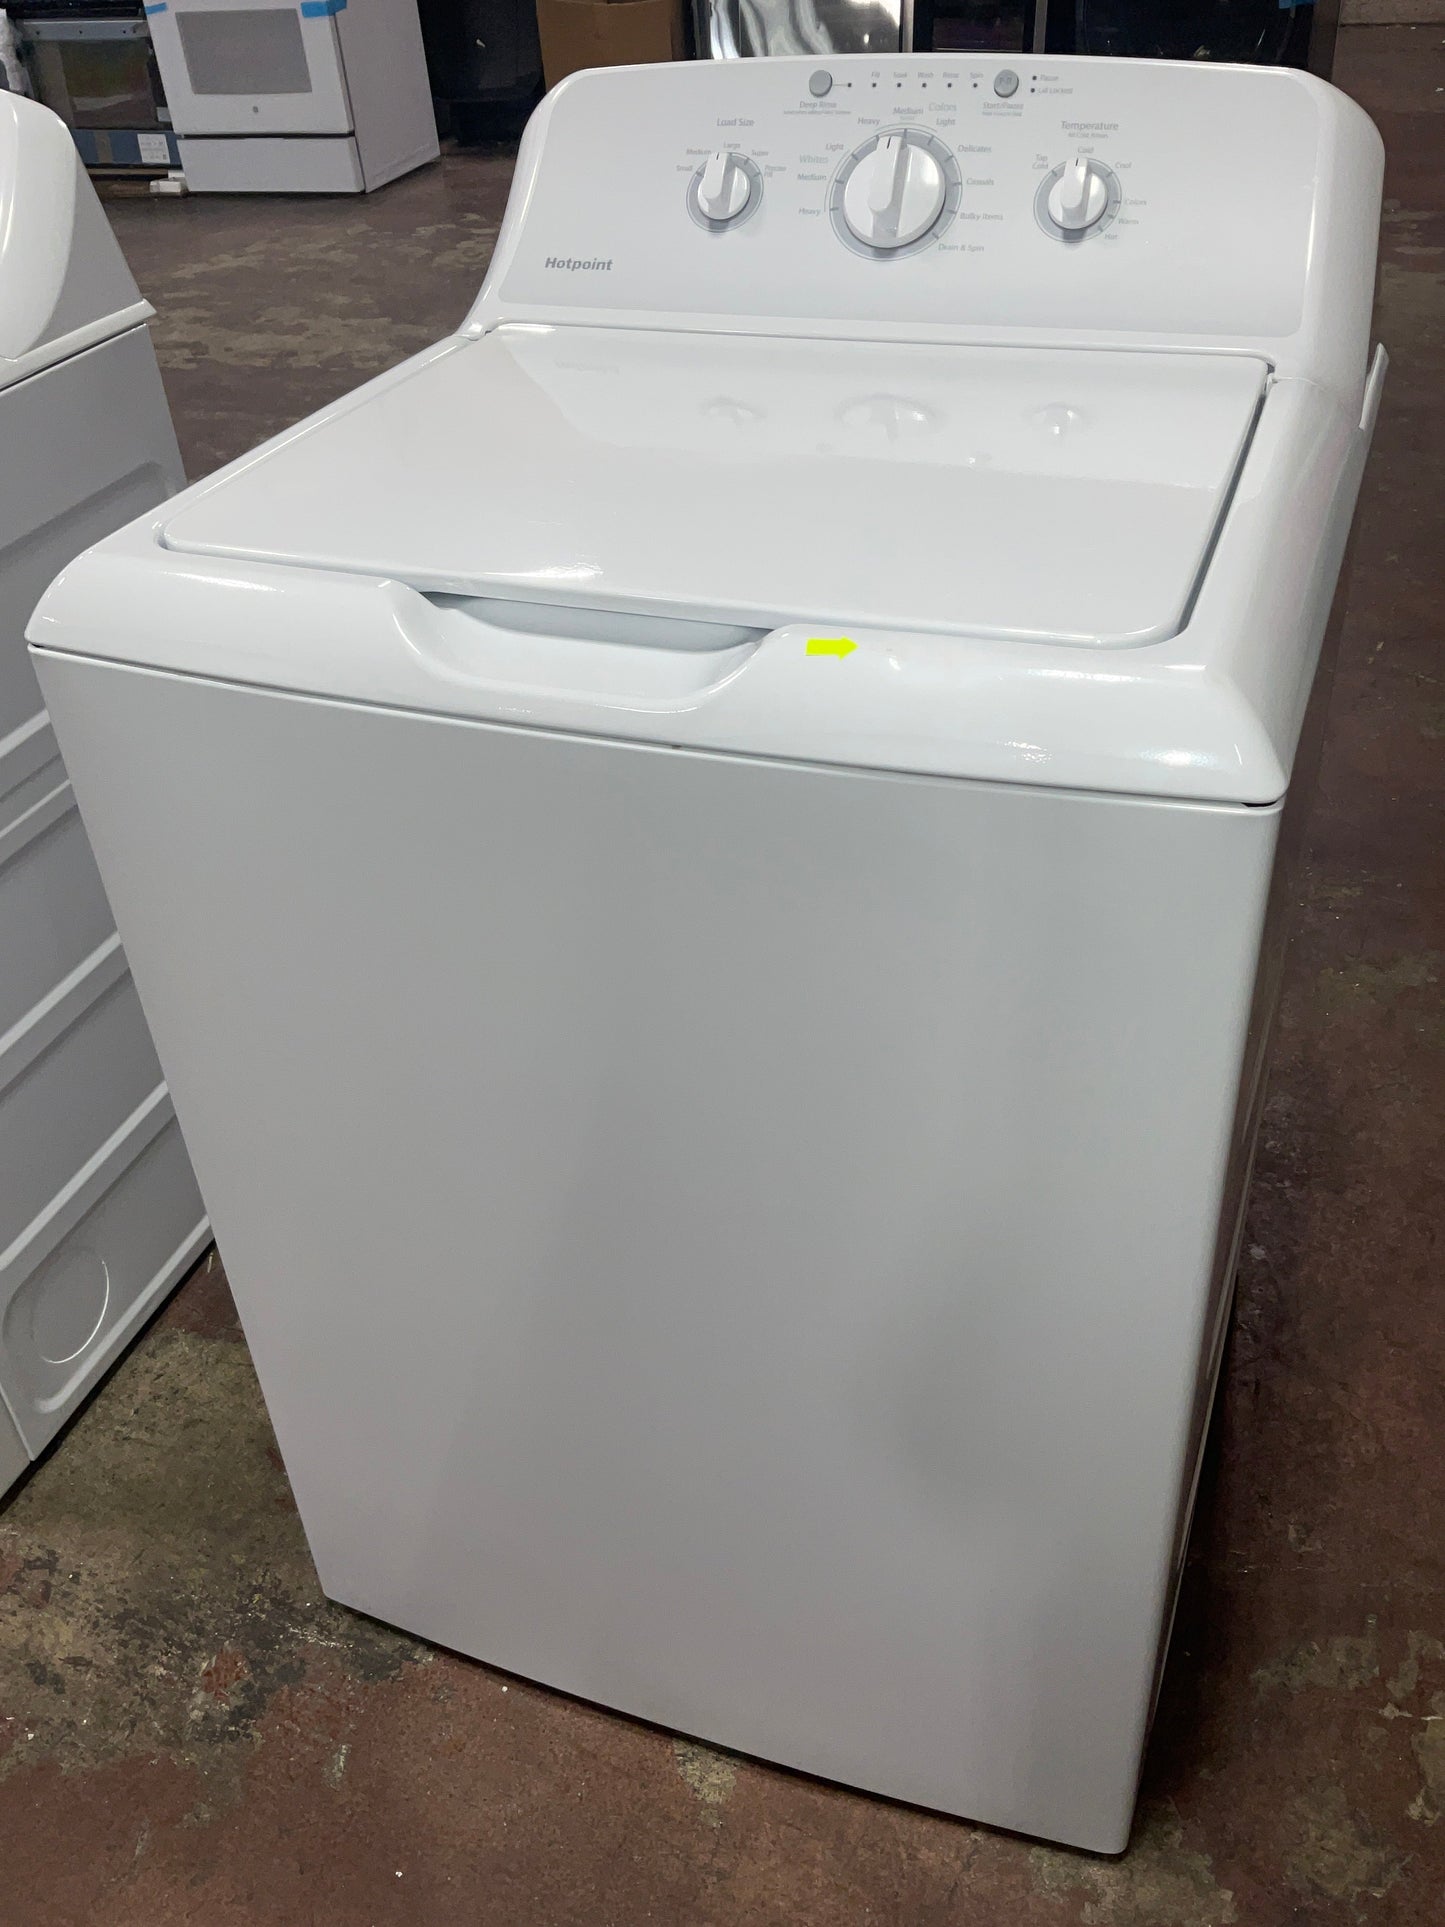 GE Hotpoint® 3.8 cu. ft. Capacity Washer with Stainless Steel Basket